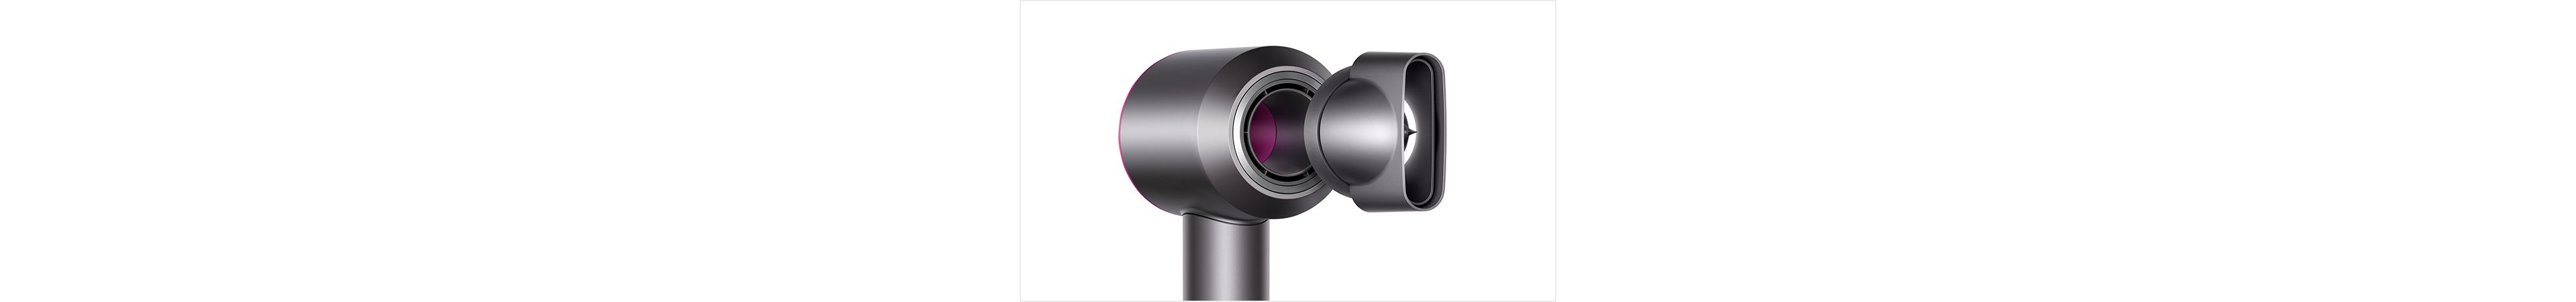 Dyson Supersonic™ Mother's Day Gift Edition | Dyson NZ